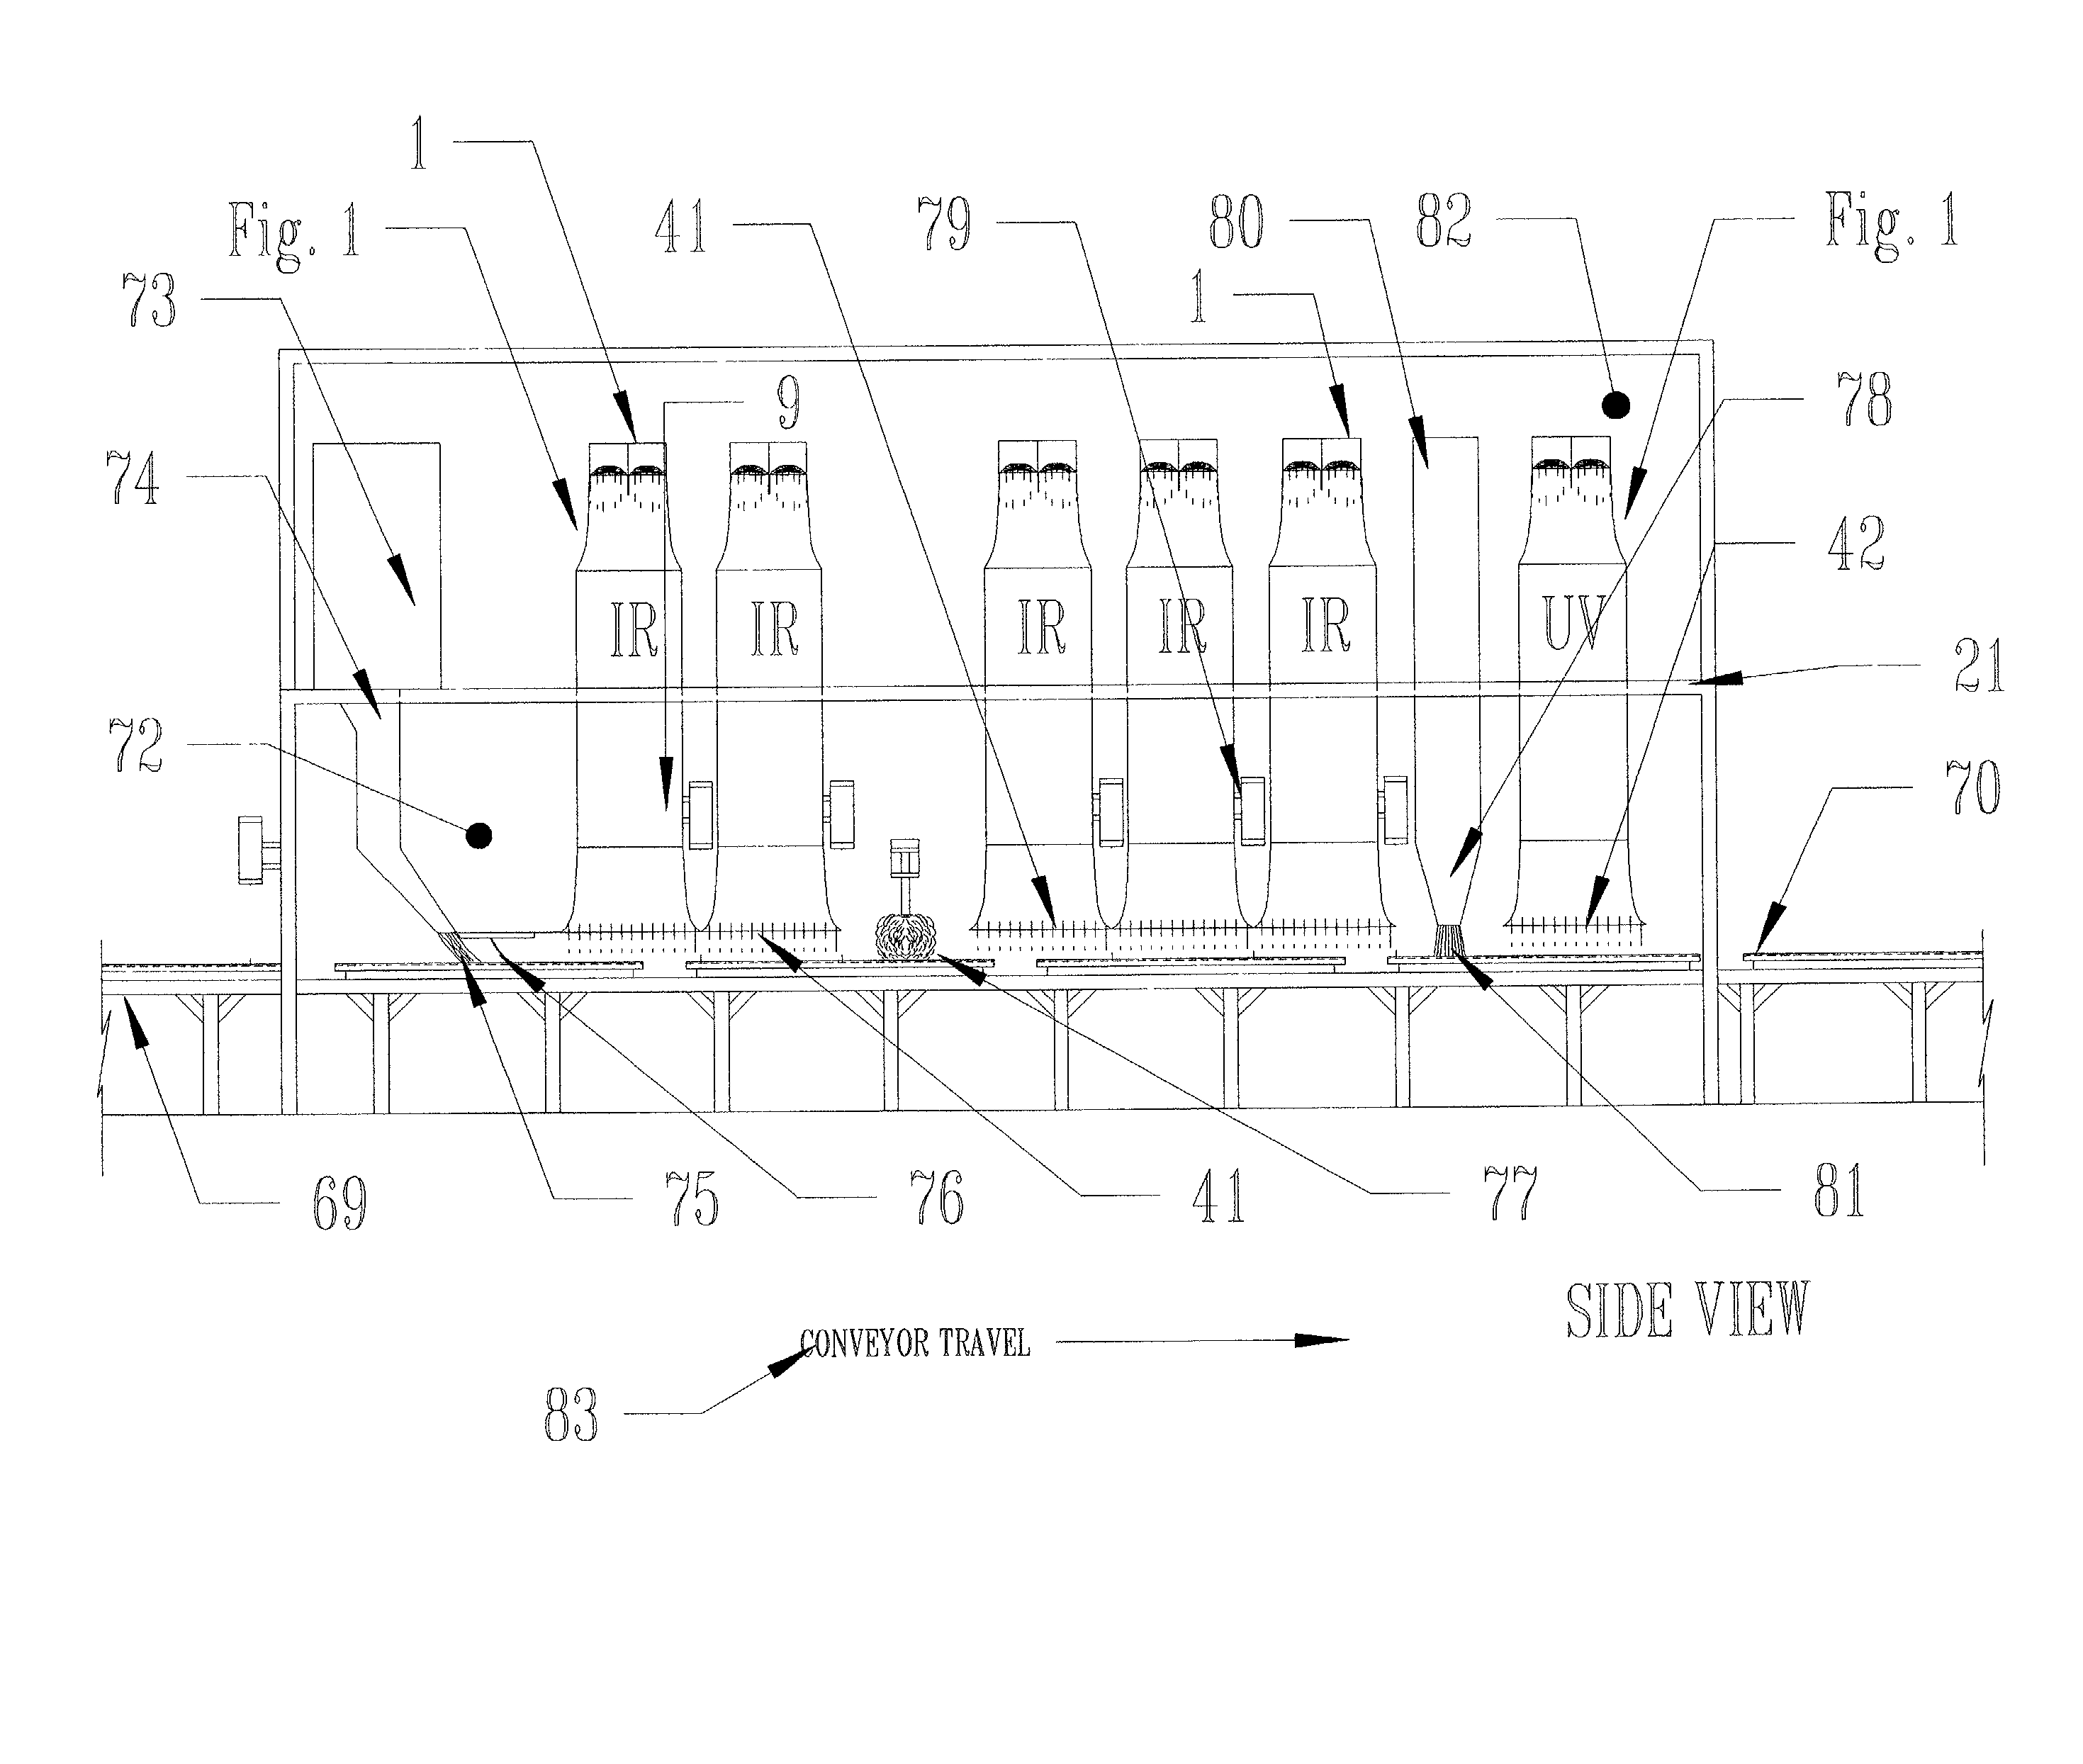 Method and apparatus for processing coatings, radiation curable coatings on wood, wood composite and other various substrates